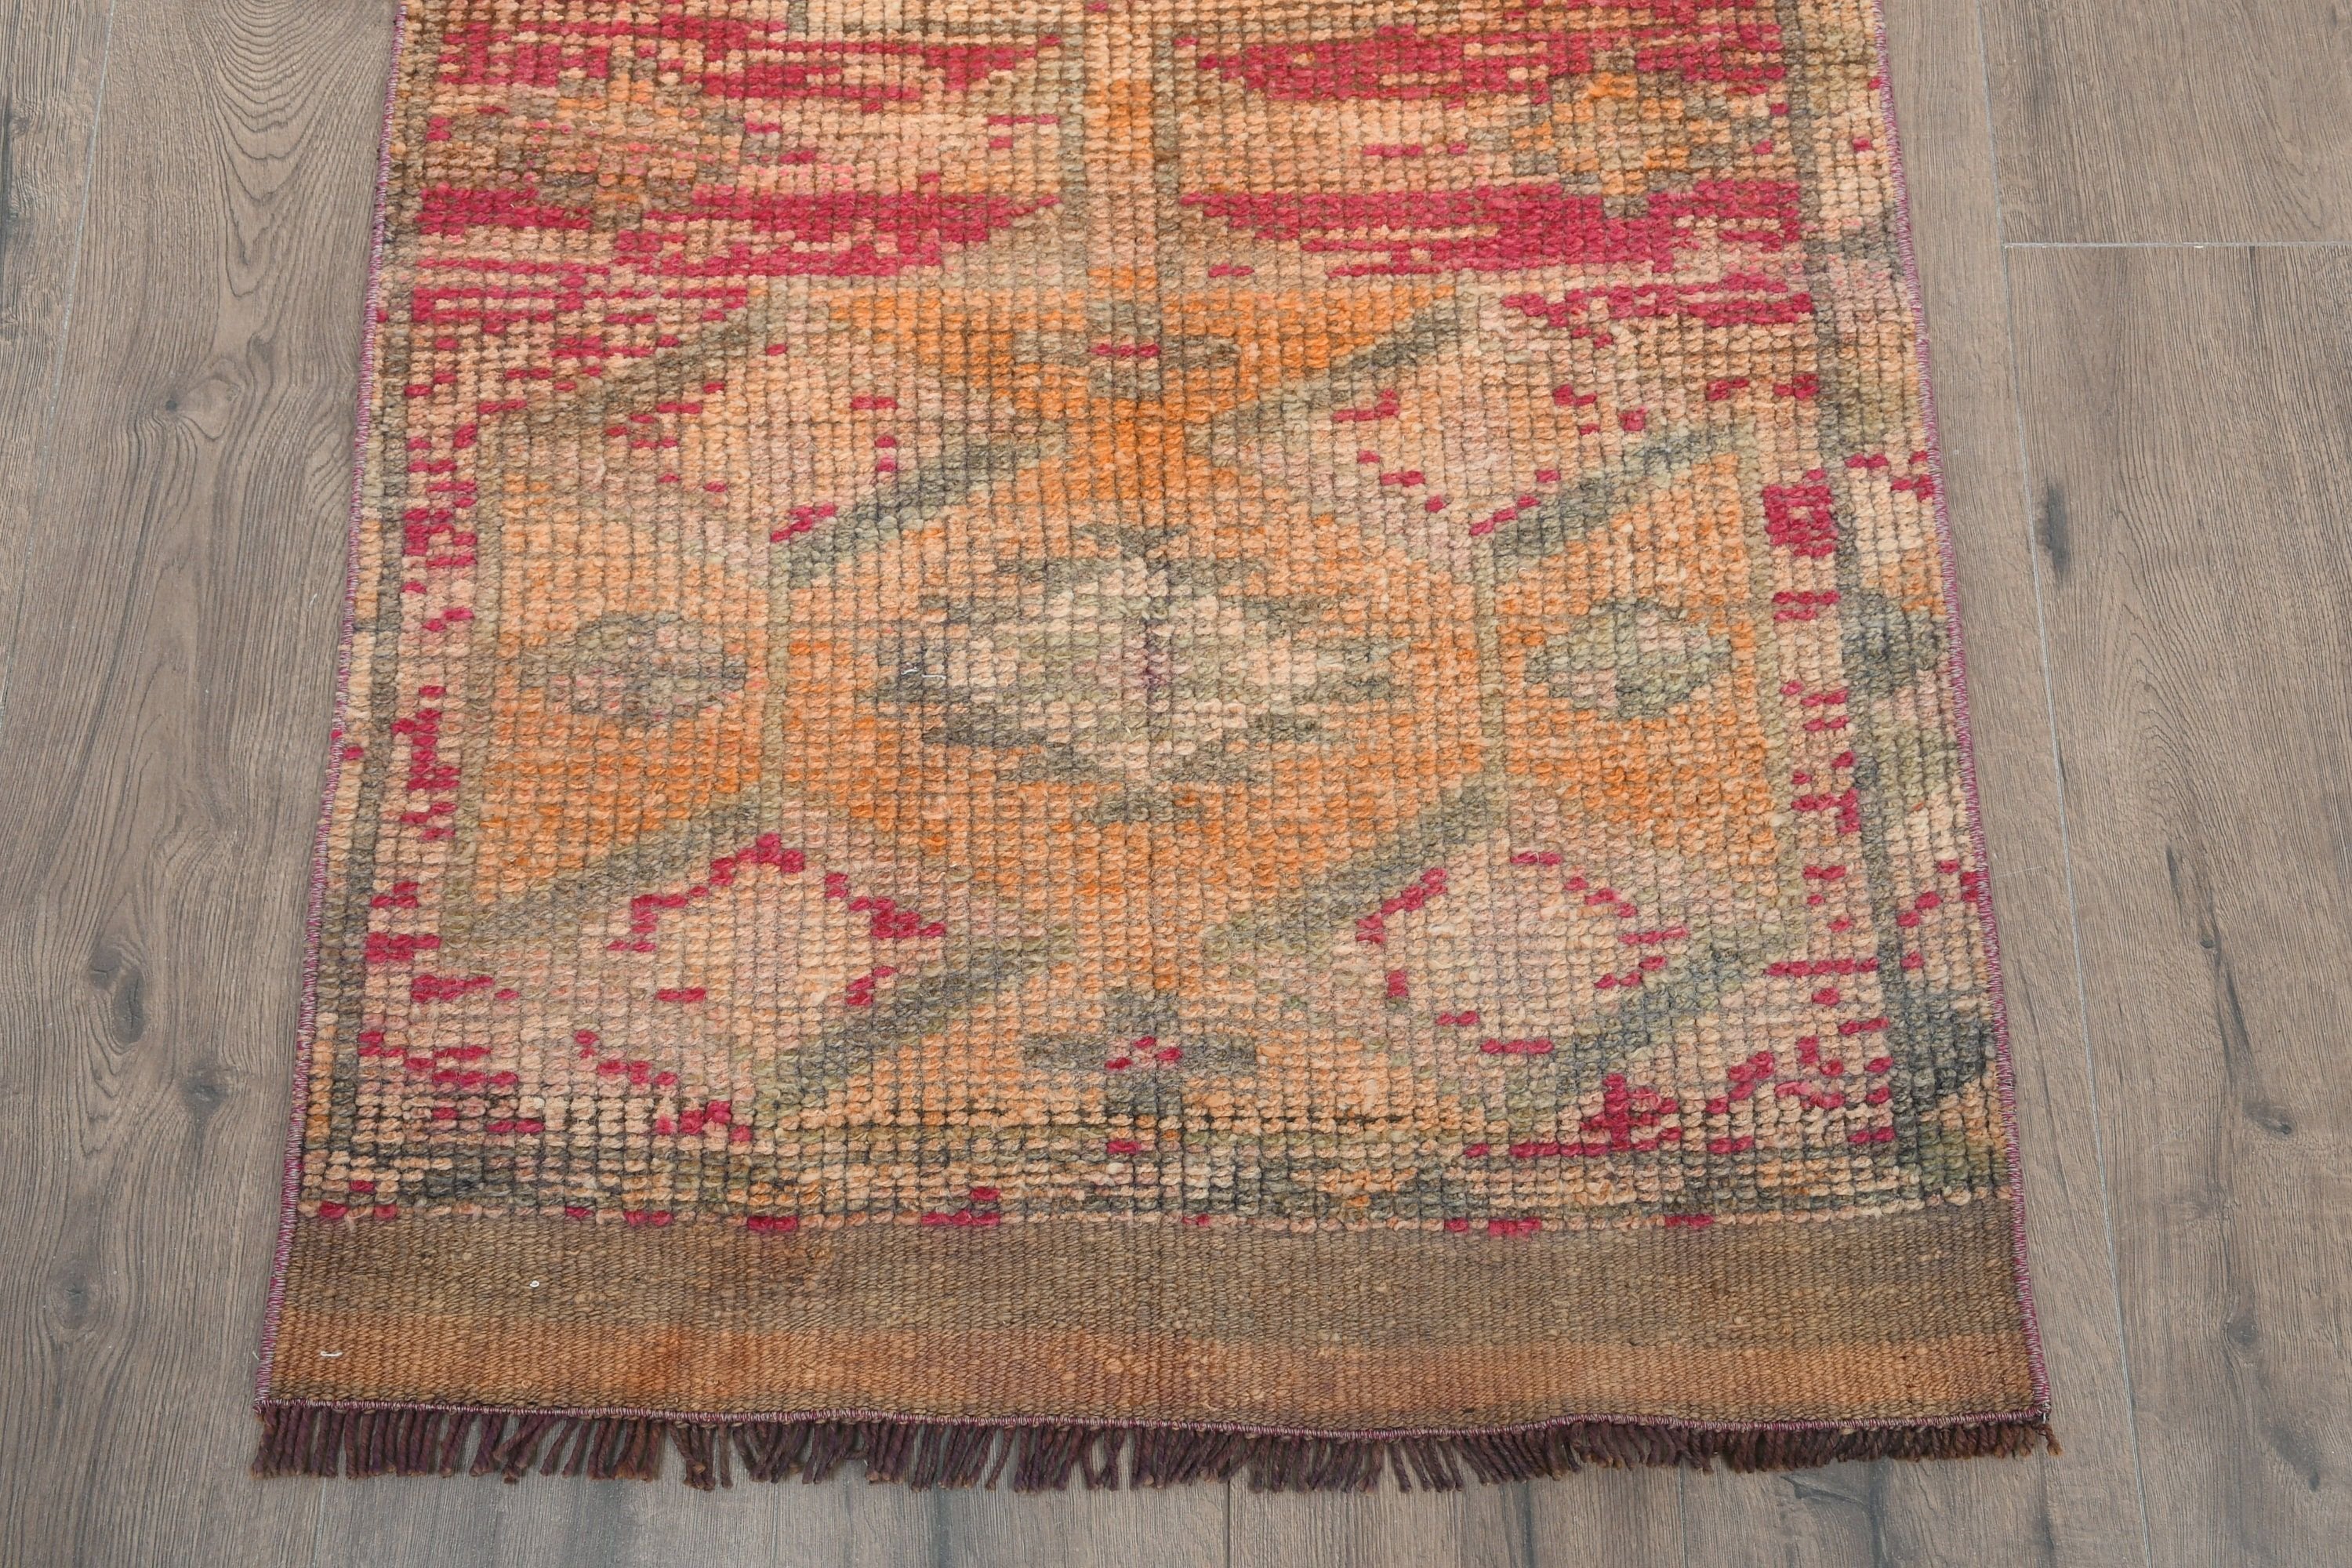 Antique Rugs, Turkish Rug, 2.5x11.6 ft Runner Rug, Vintage Rug, Stair Rug, Abstract Rug, Pink Moroccan Rug, Rugs for Runner, Anatolian Rug